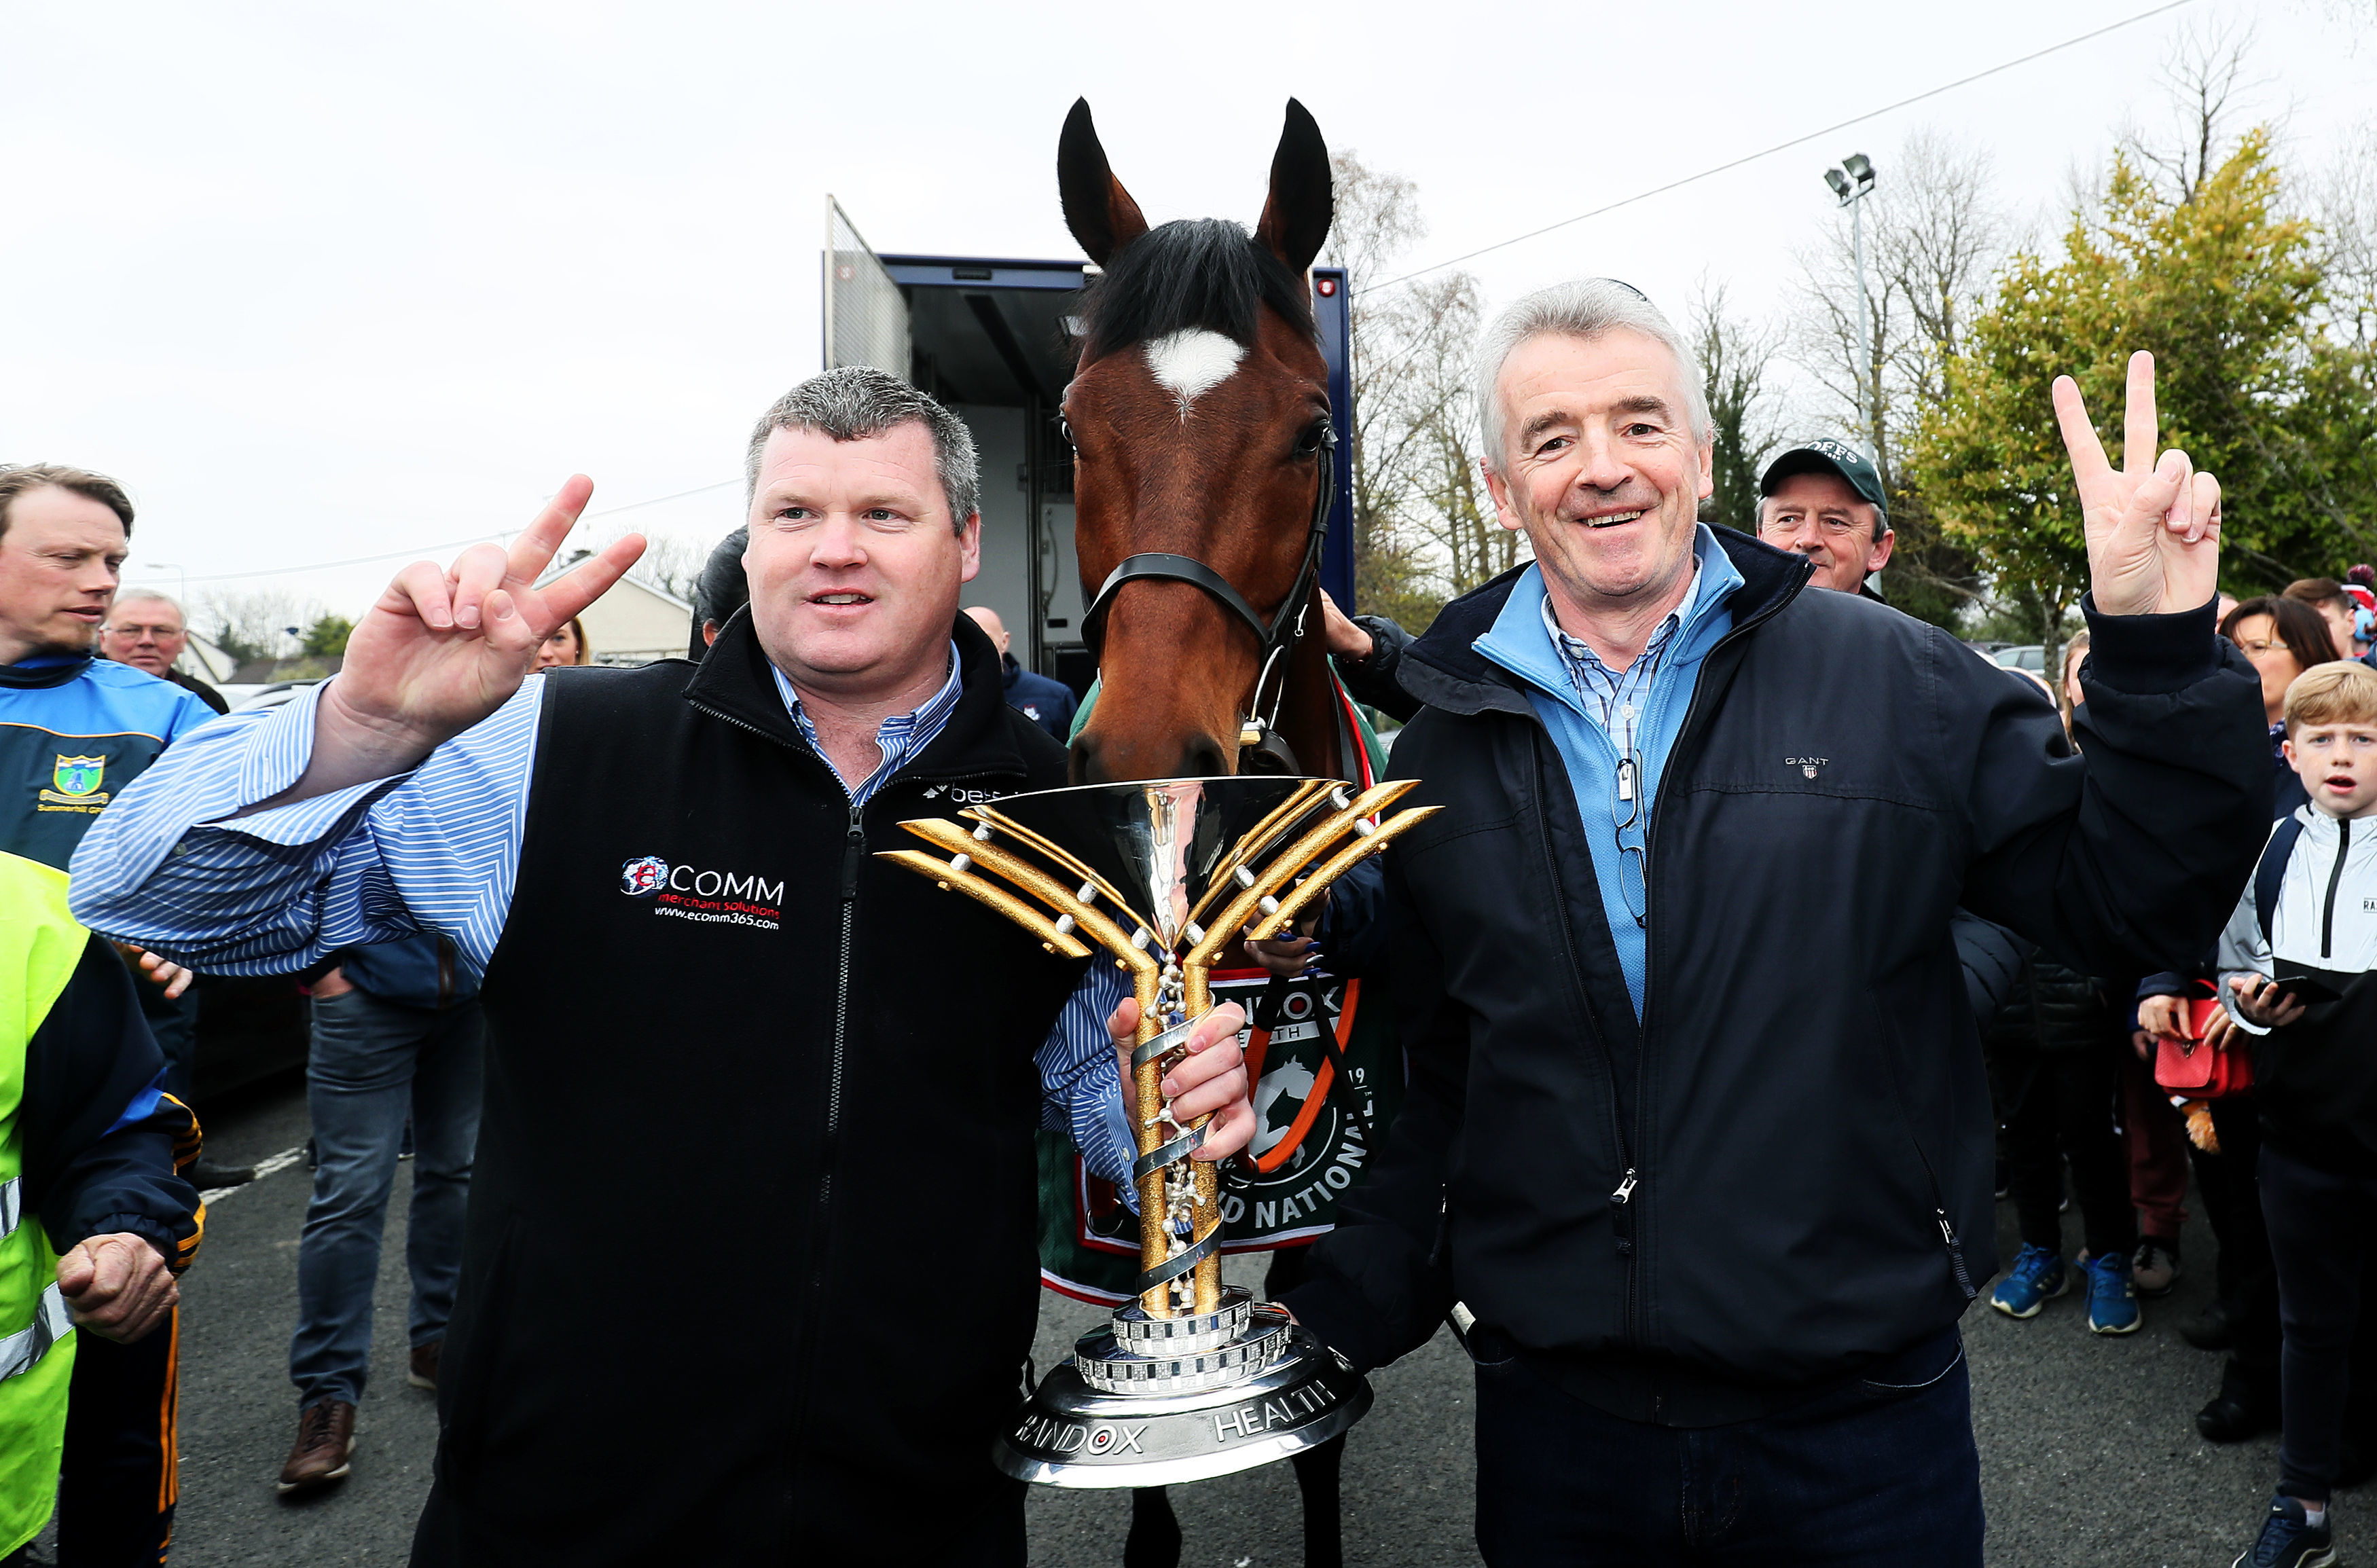 , Gordon Elliott’s legendary horse looks unrecognisable in new career – can you work out who it is?